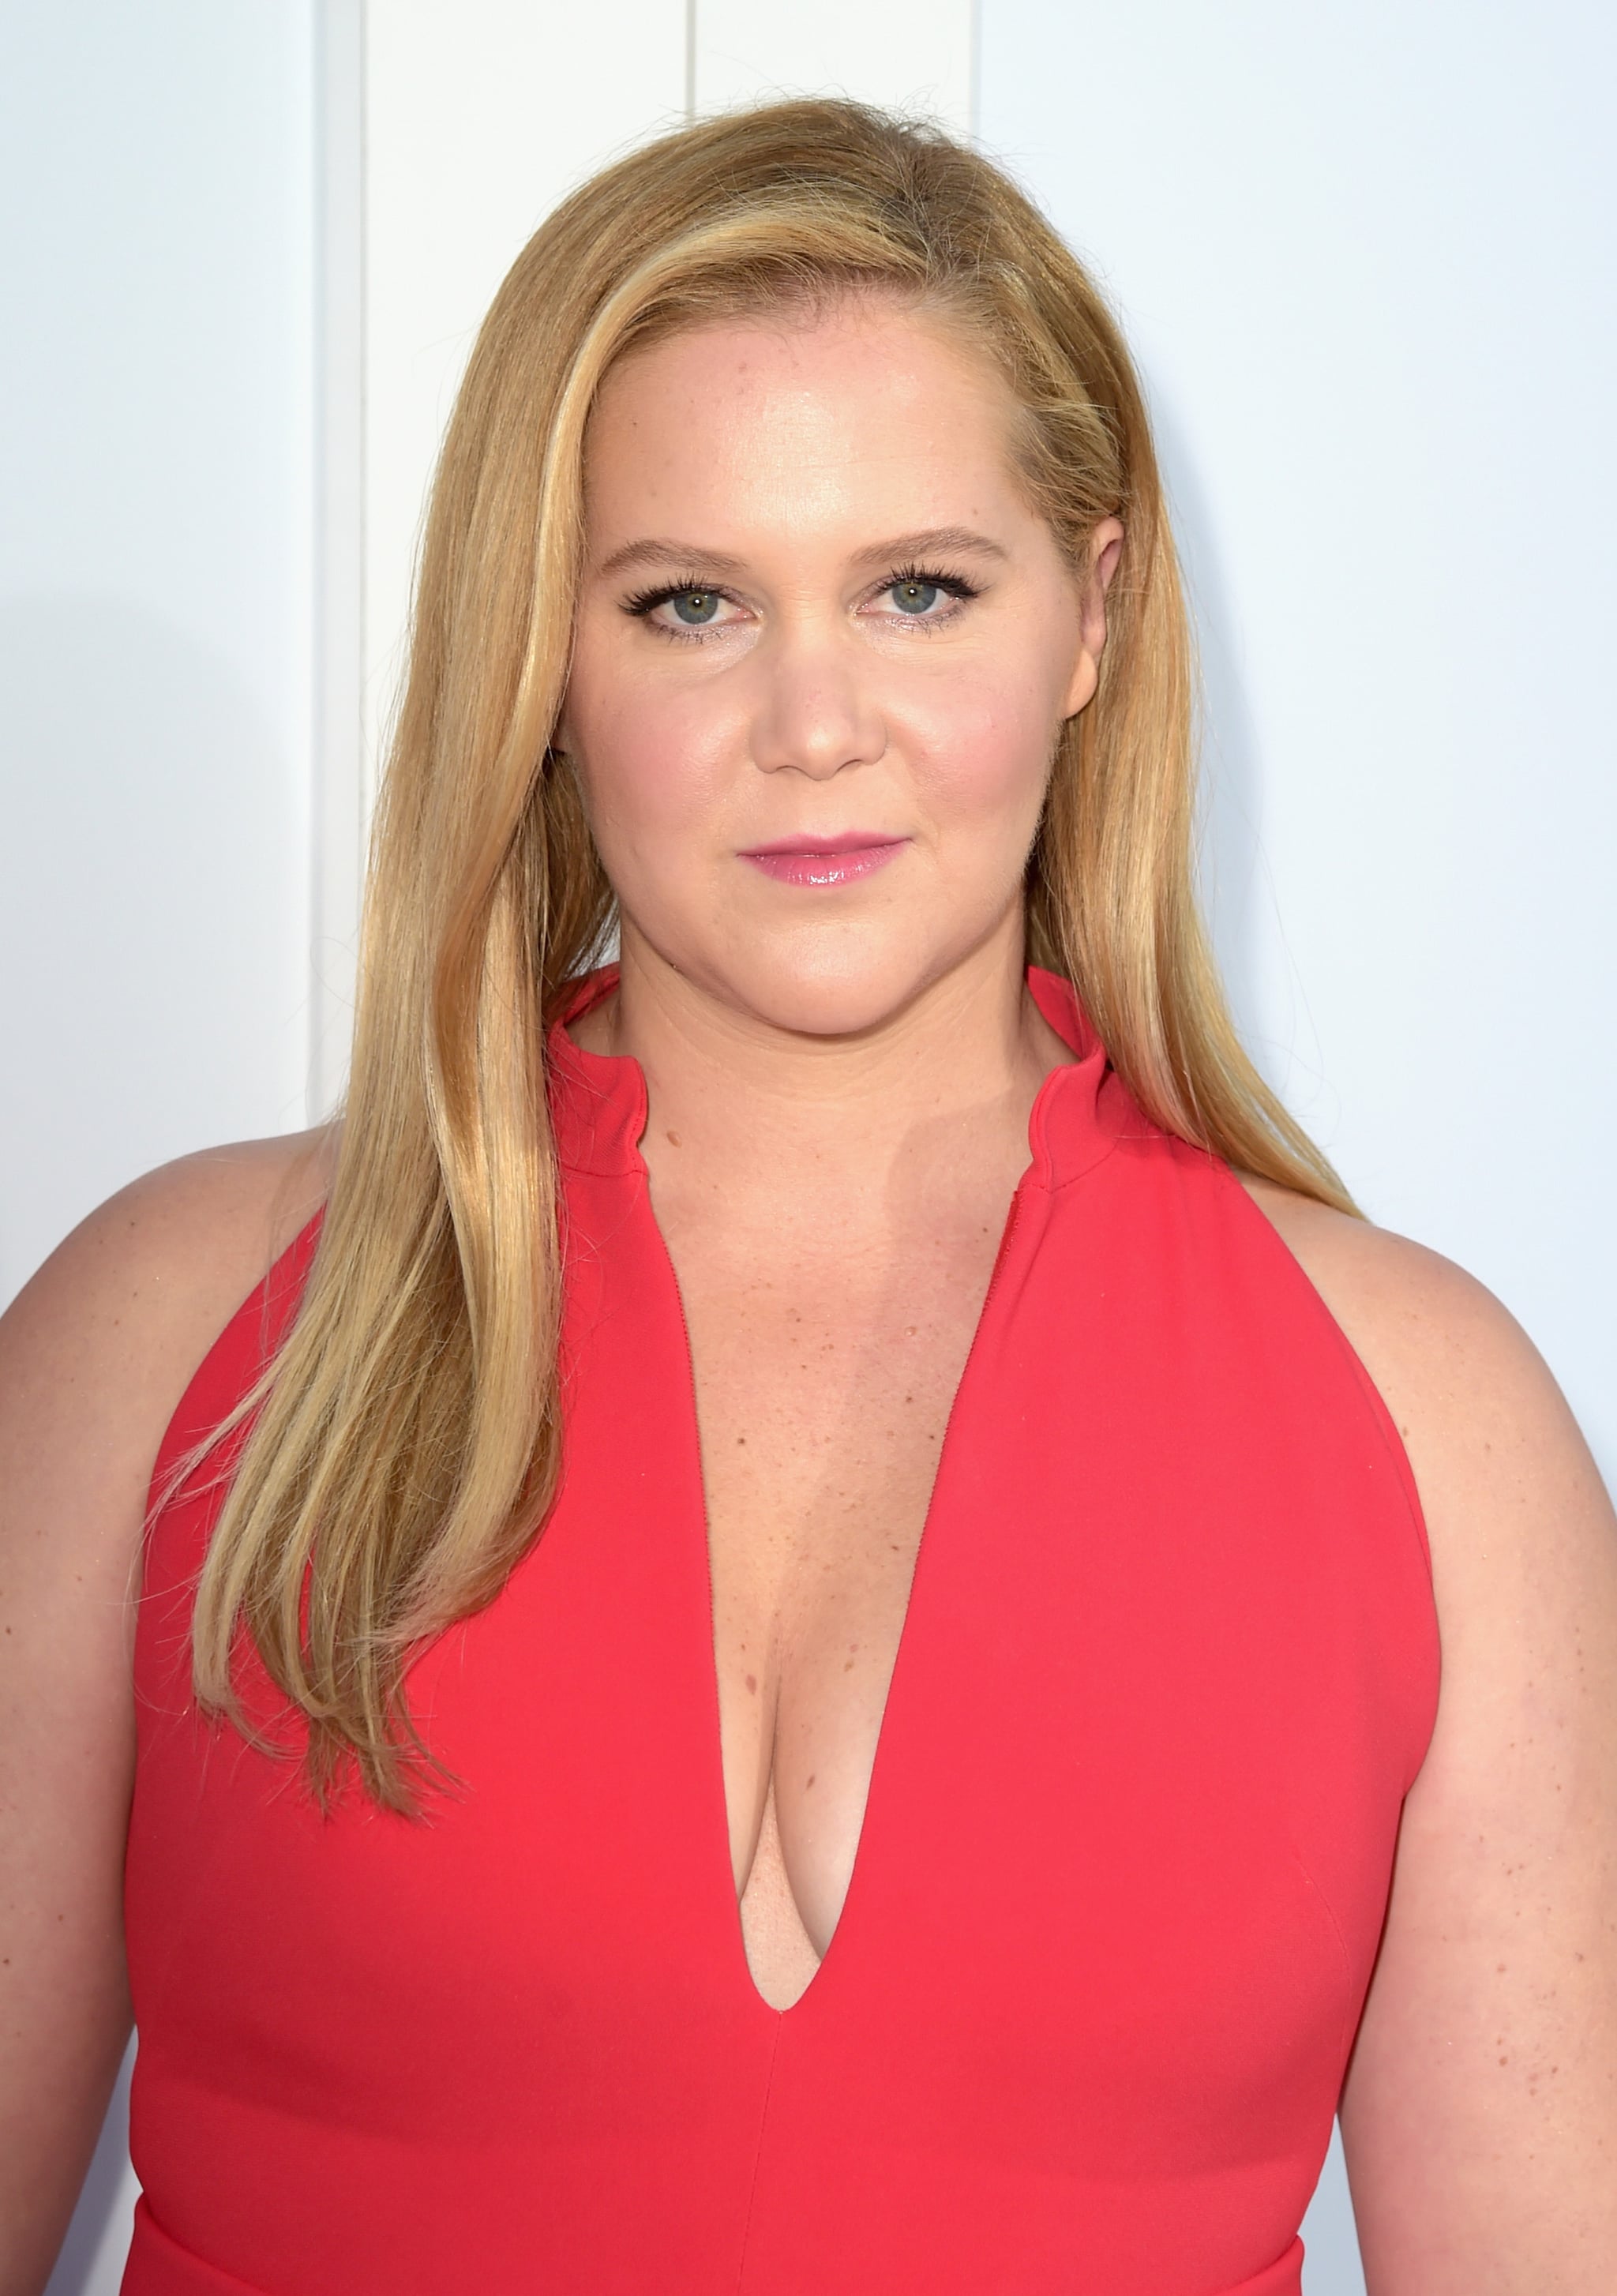 WESTWOOD, CA - APRIL 17:  Amy Schumer attends the premiere of STX Films' 